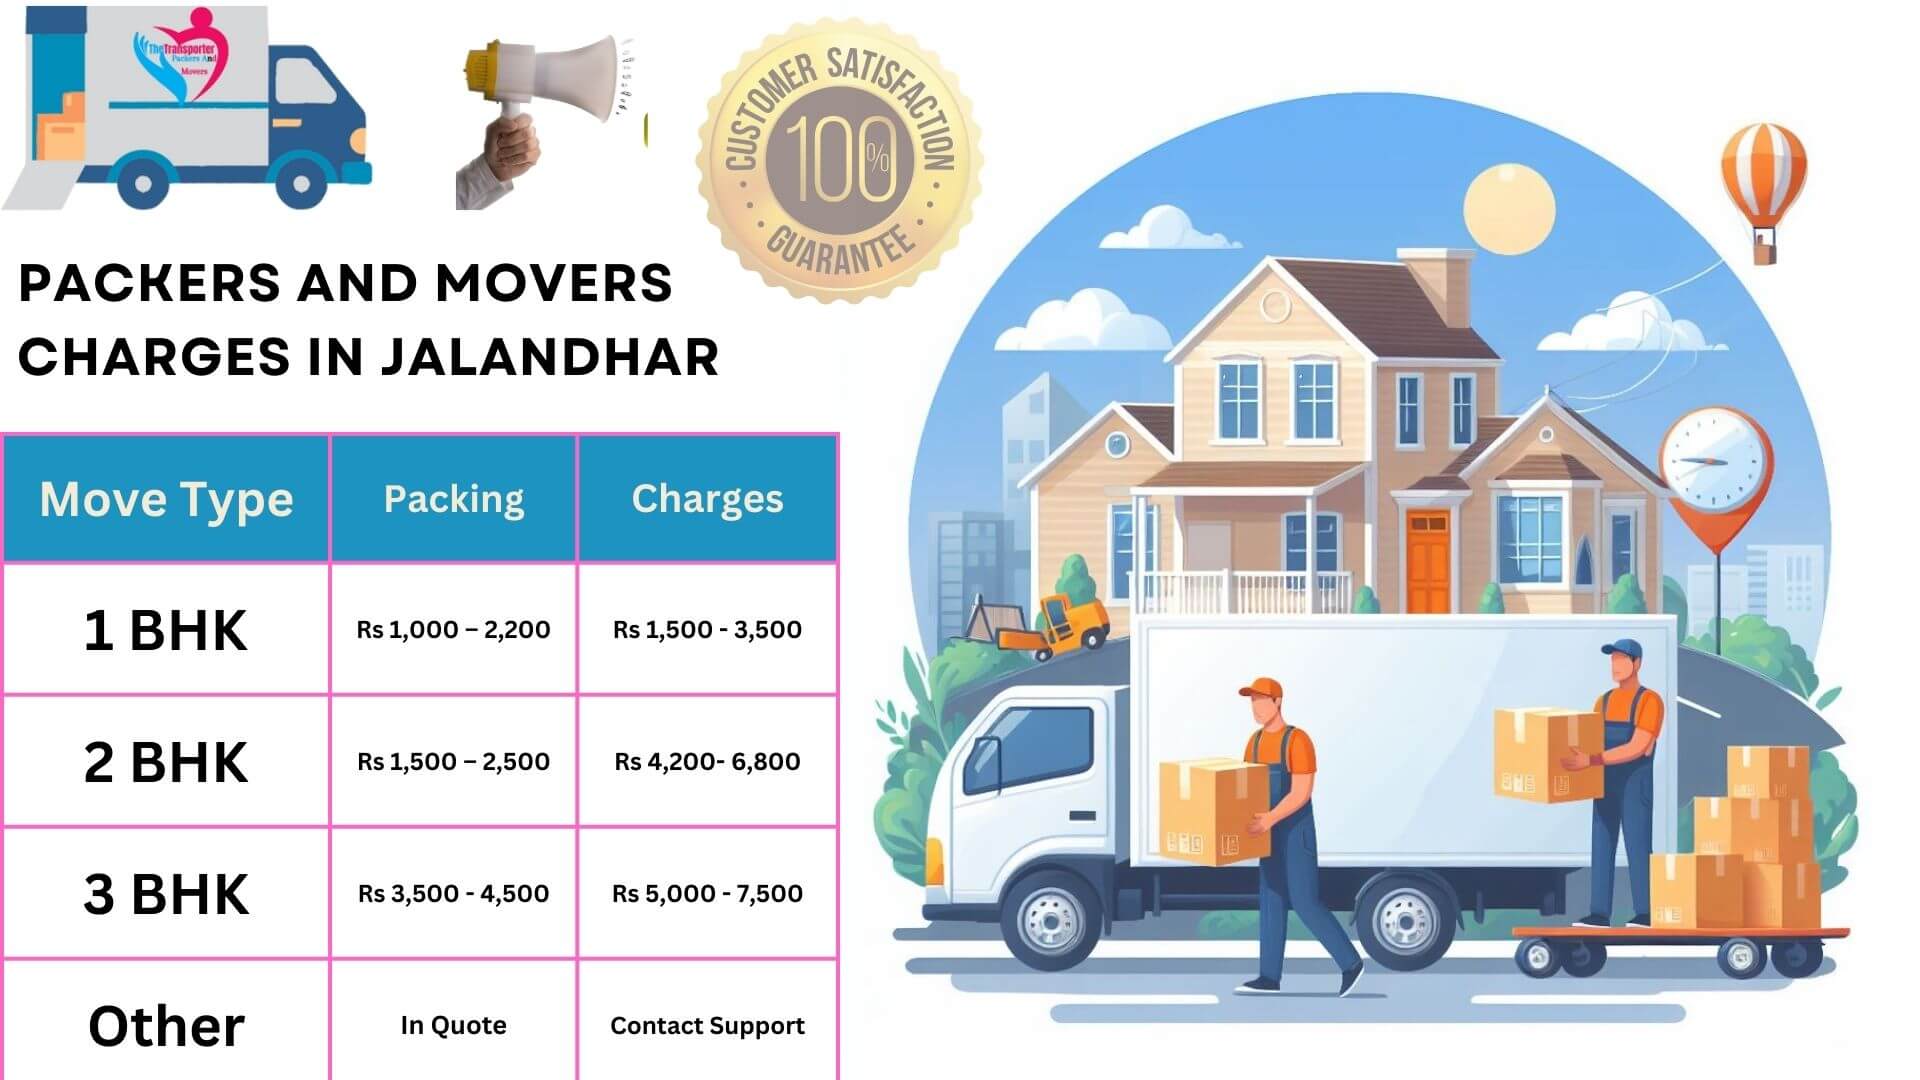 TheTransporter Packers and movers Charges list in Jalandhar 